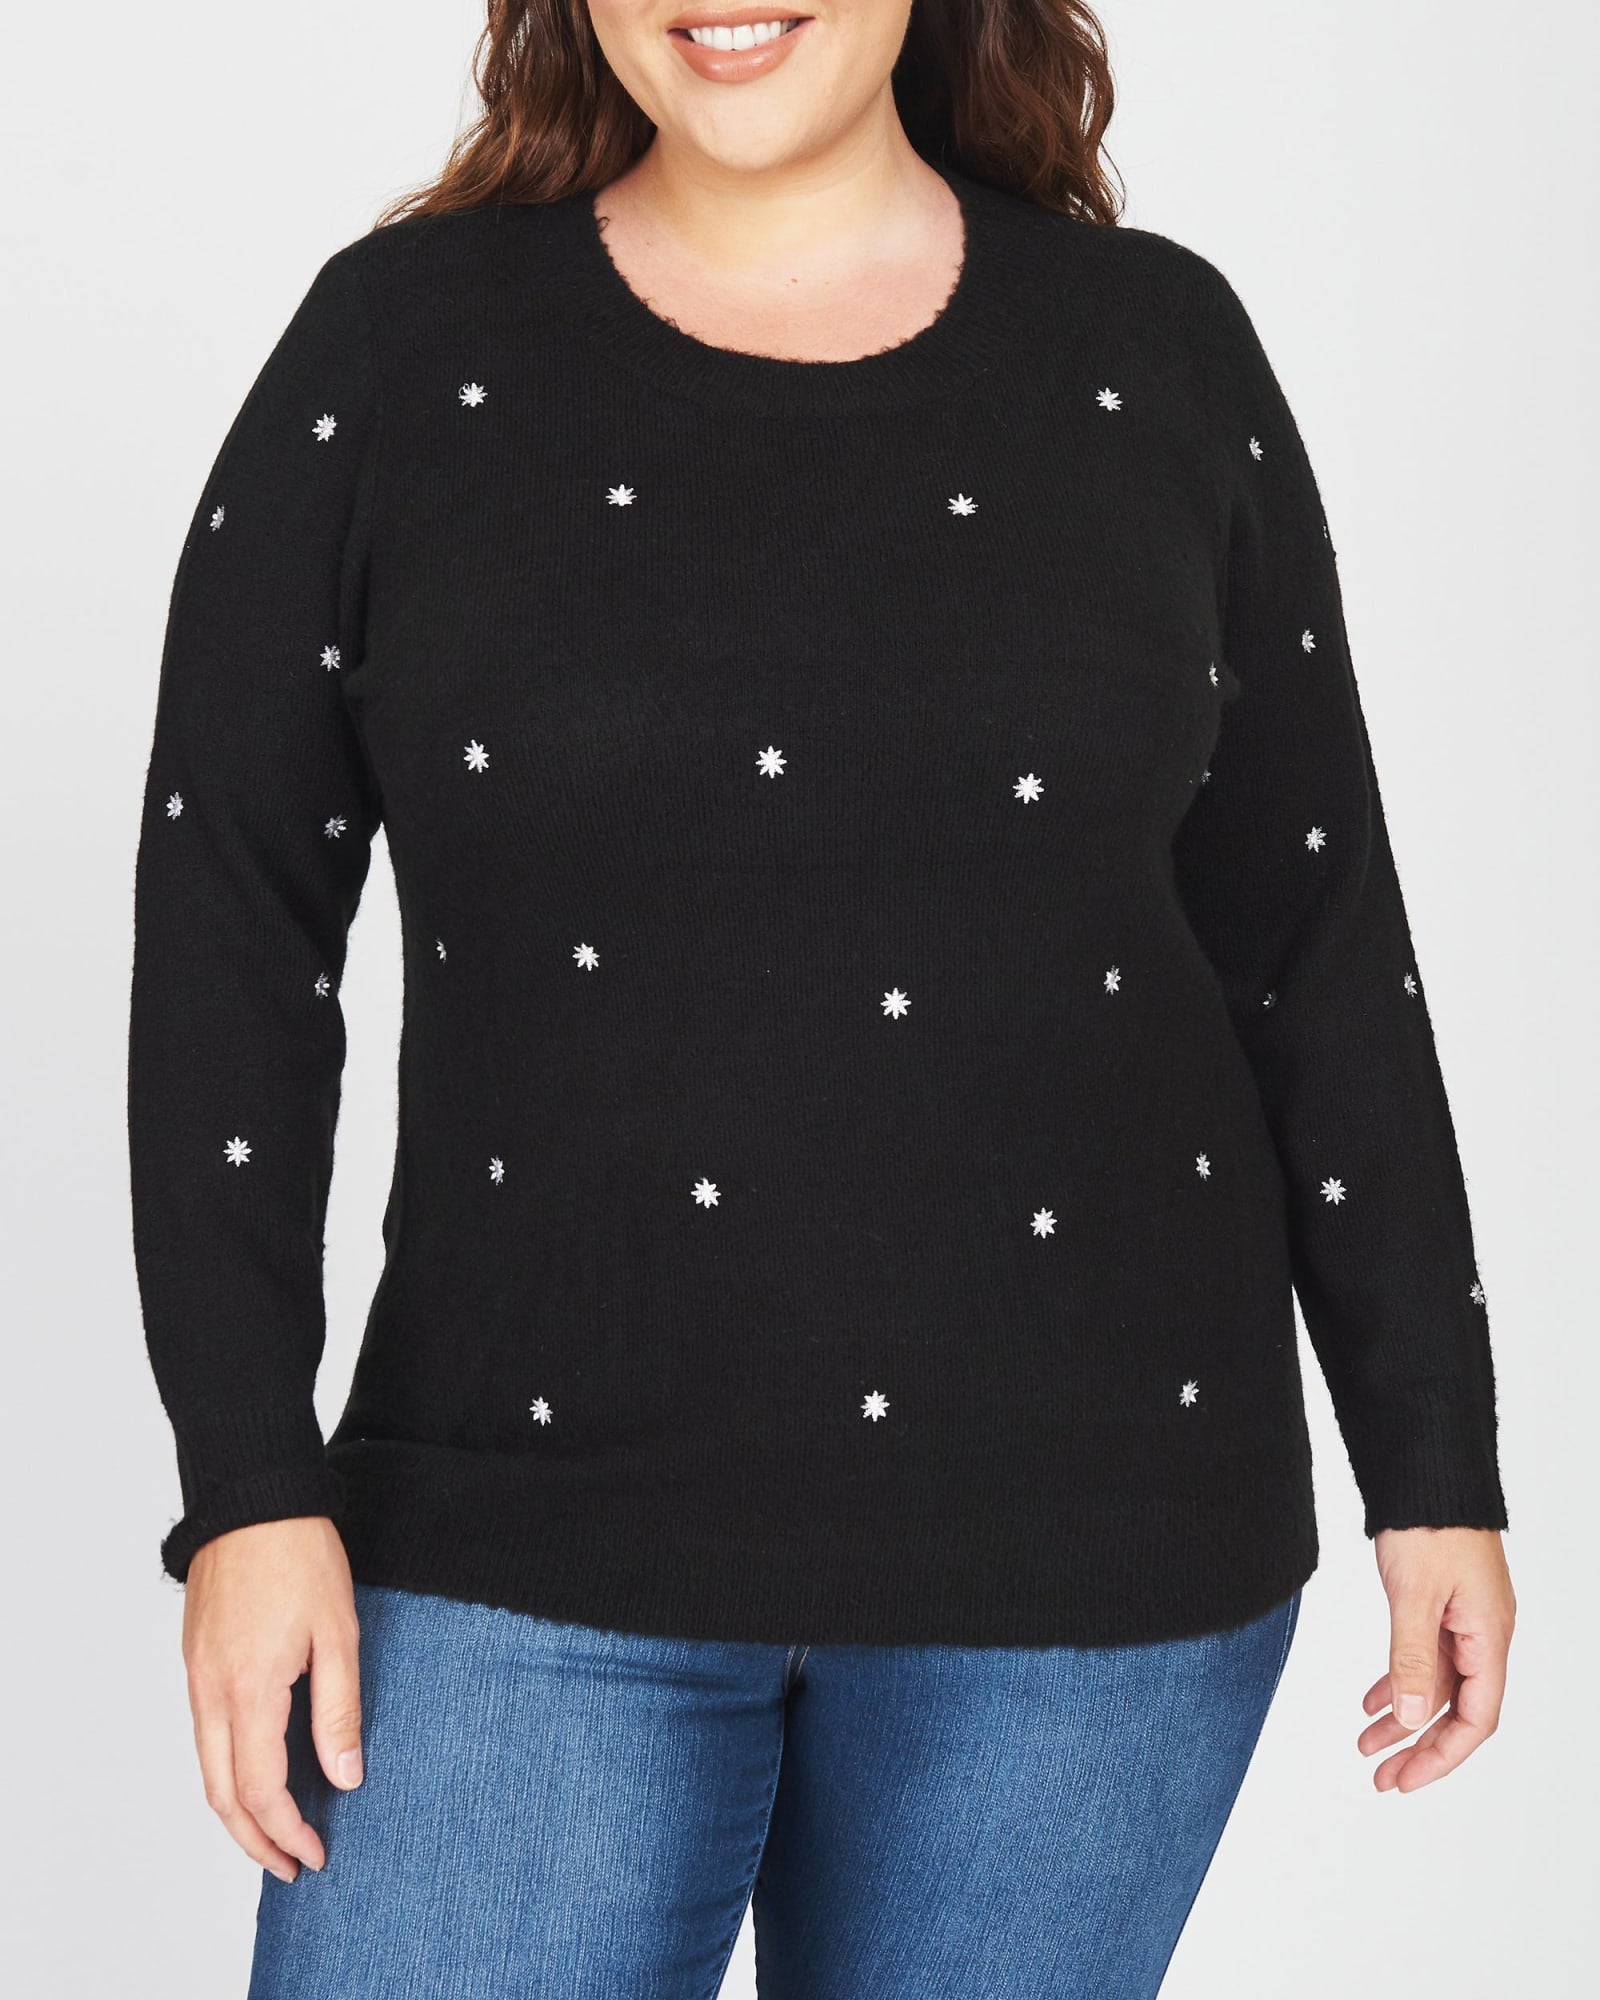 Sparkly Sweaters For Women